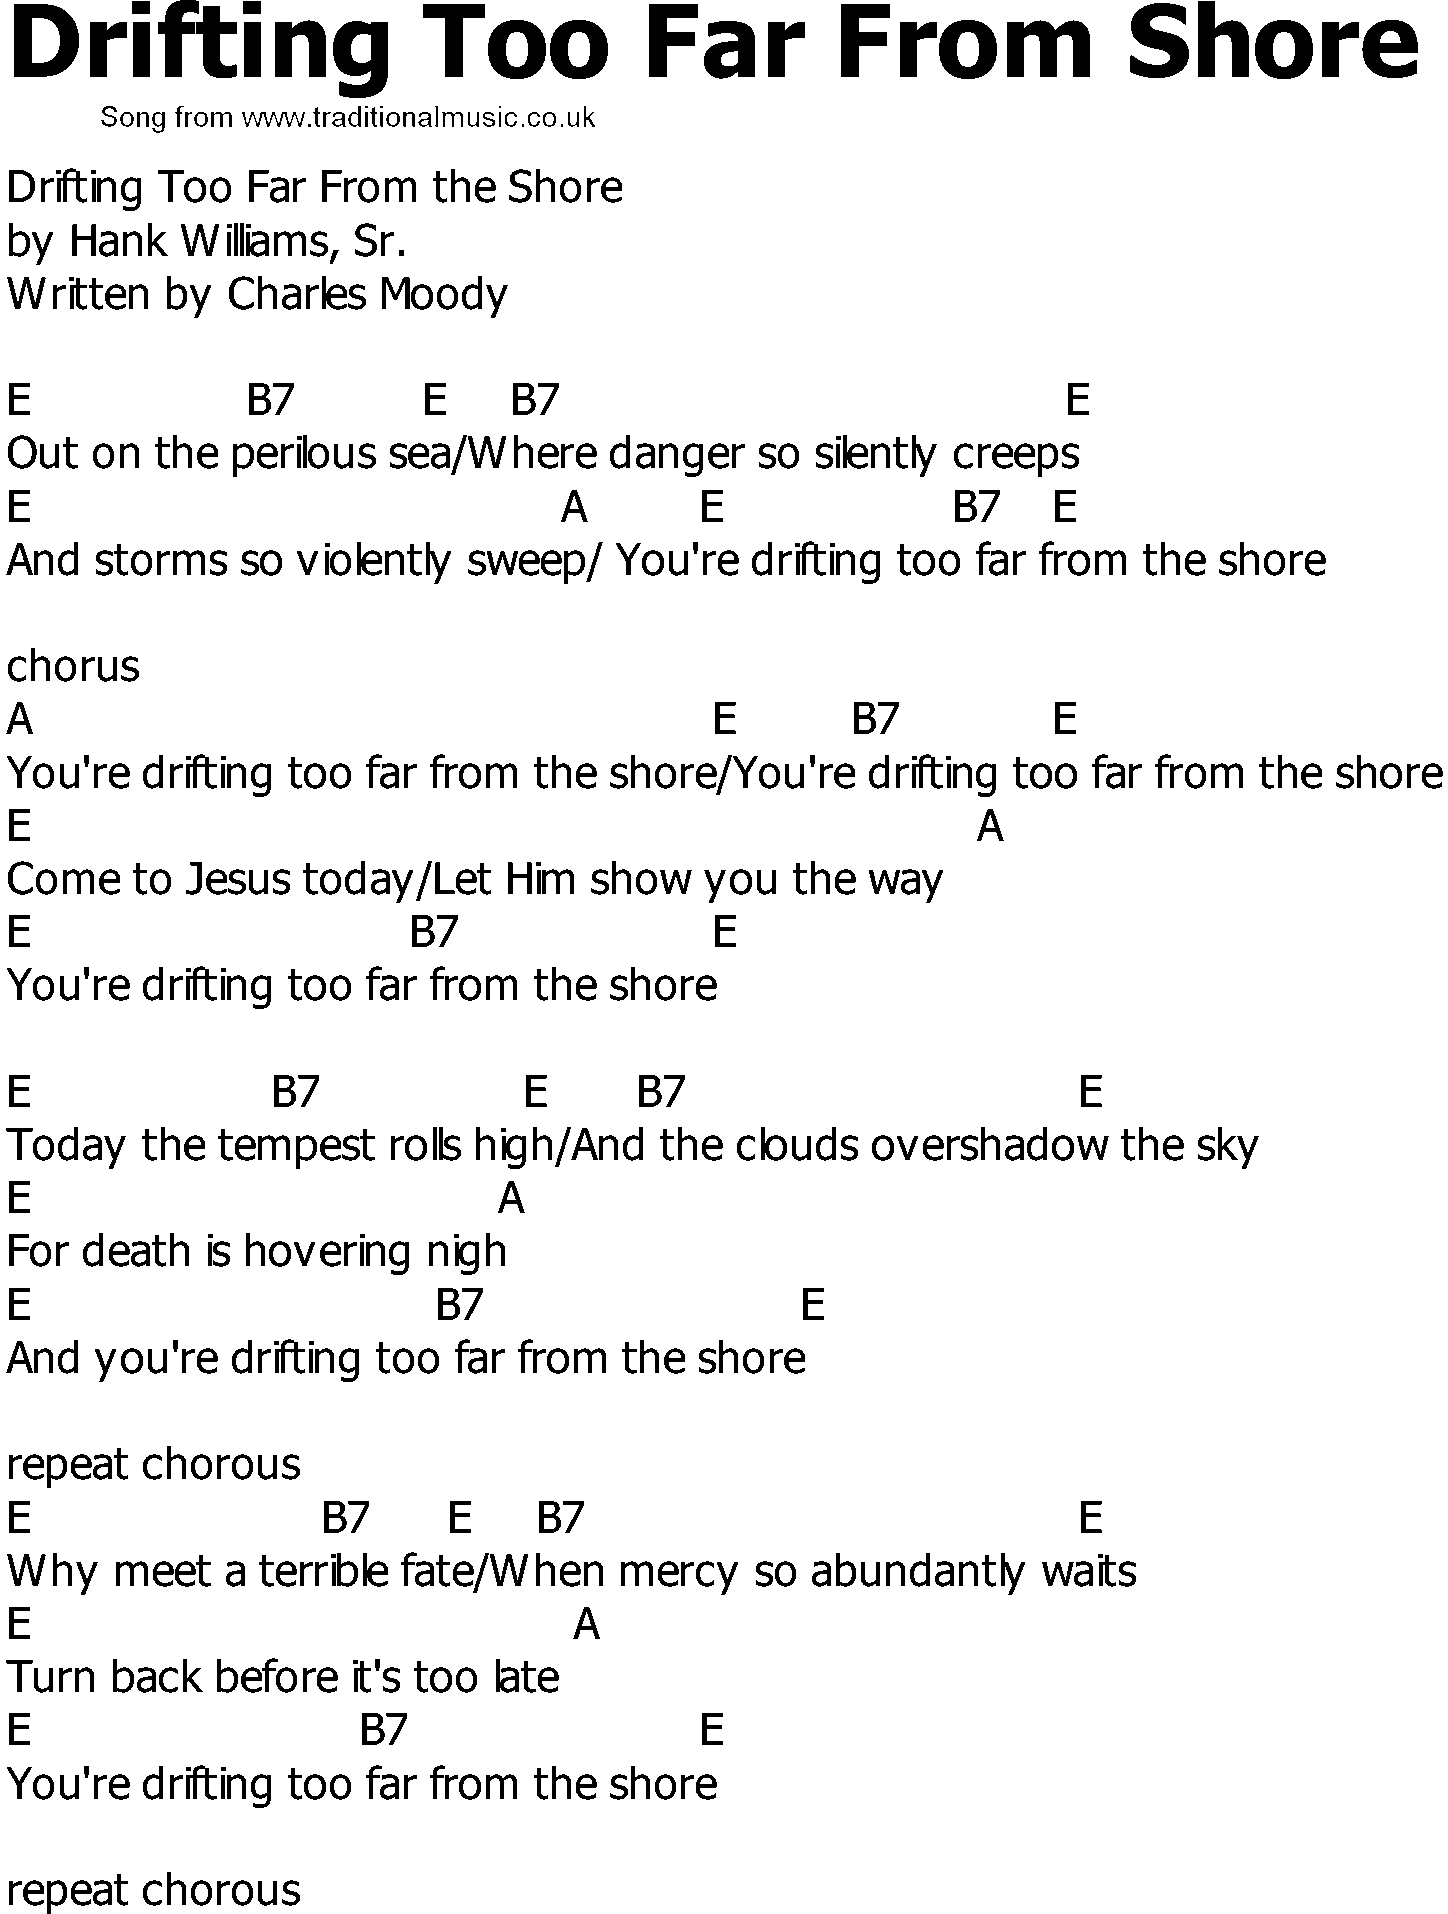 Old Country song lyrics with chords - Drifting Too Far From Shore